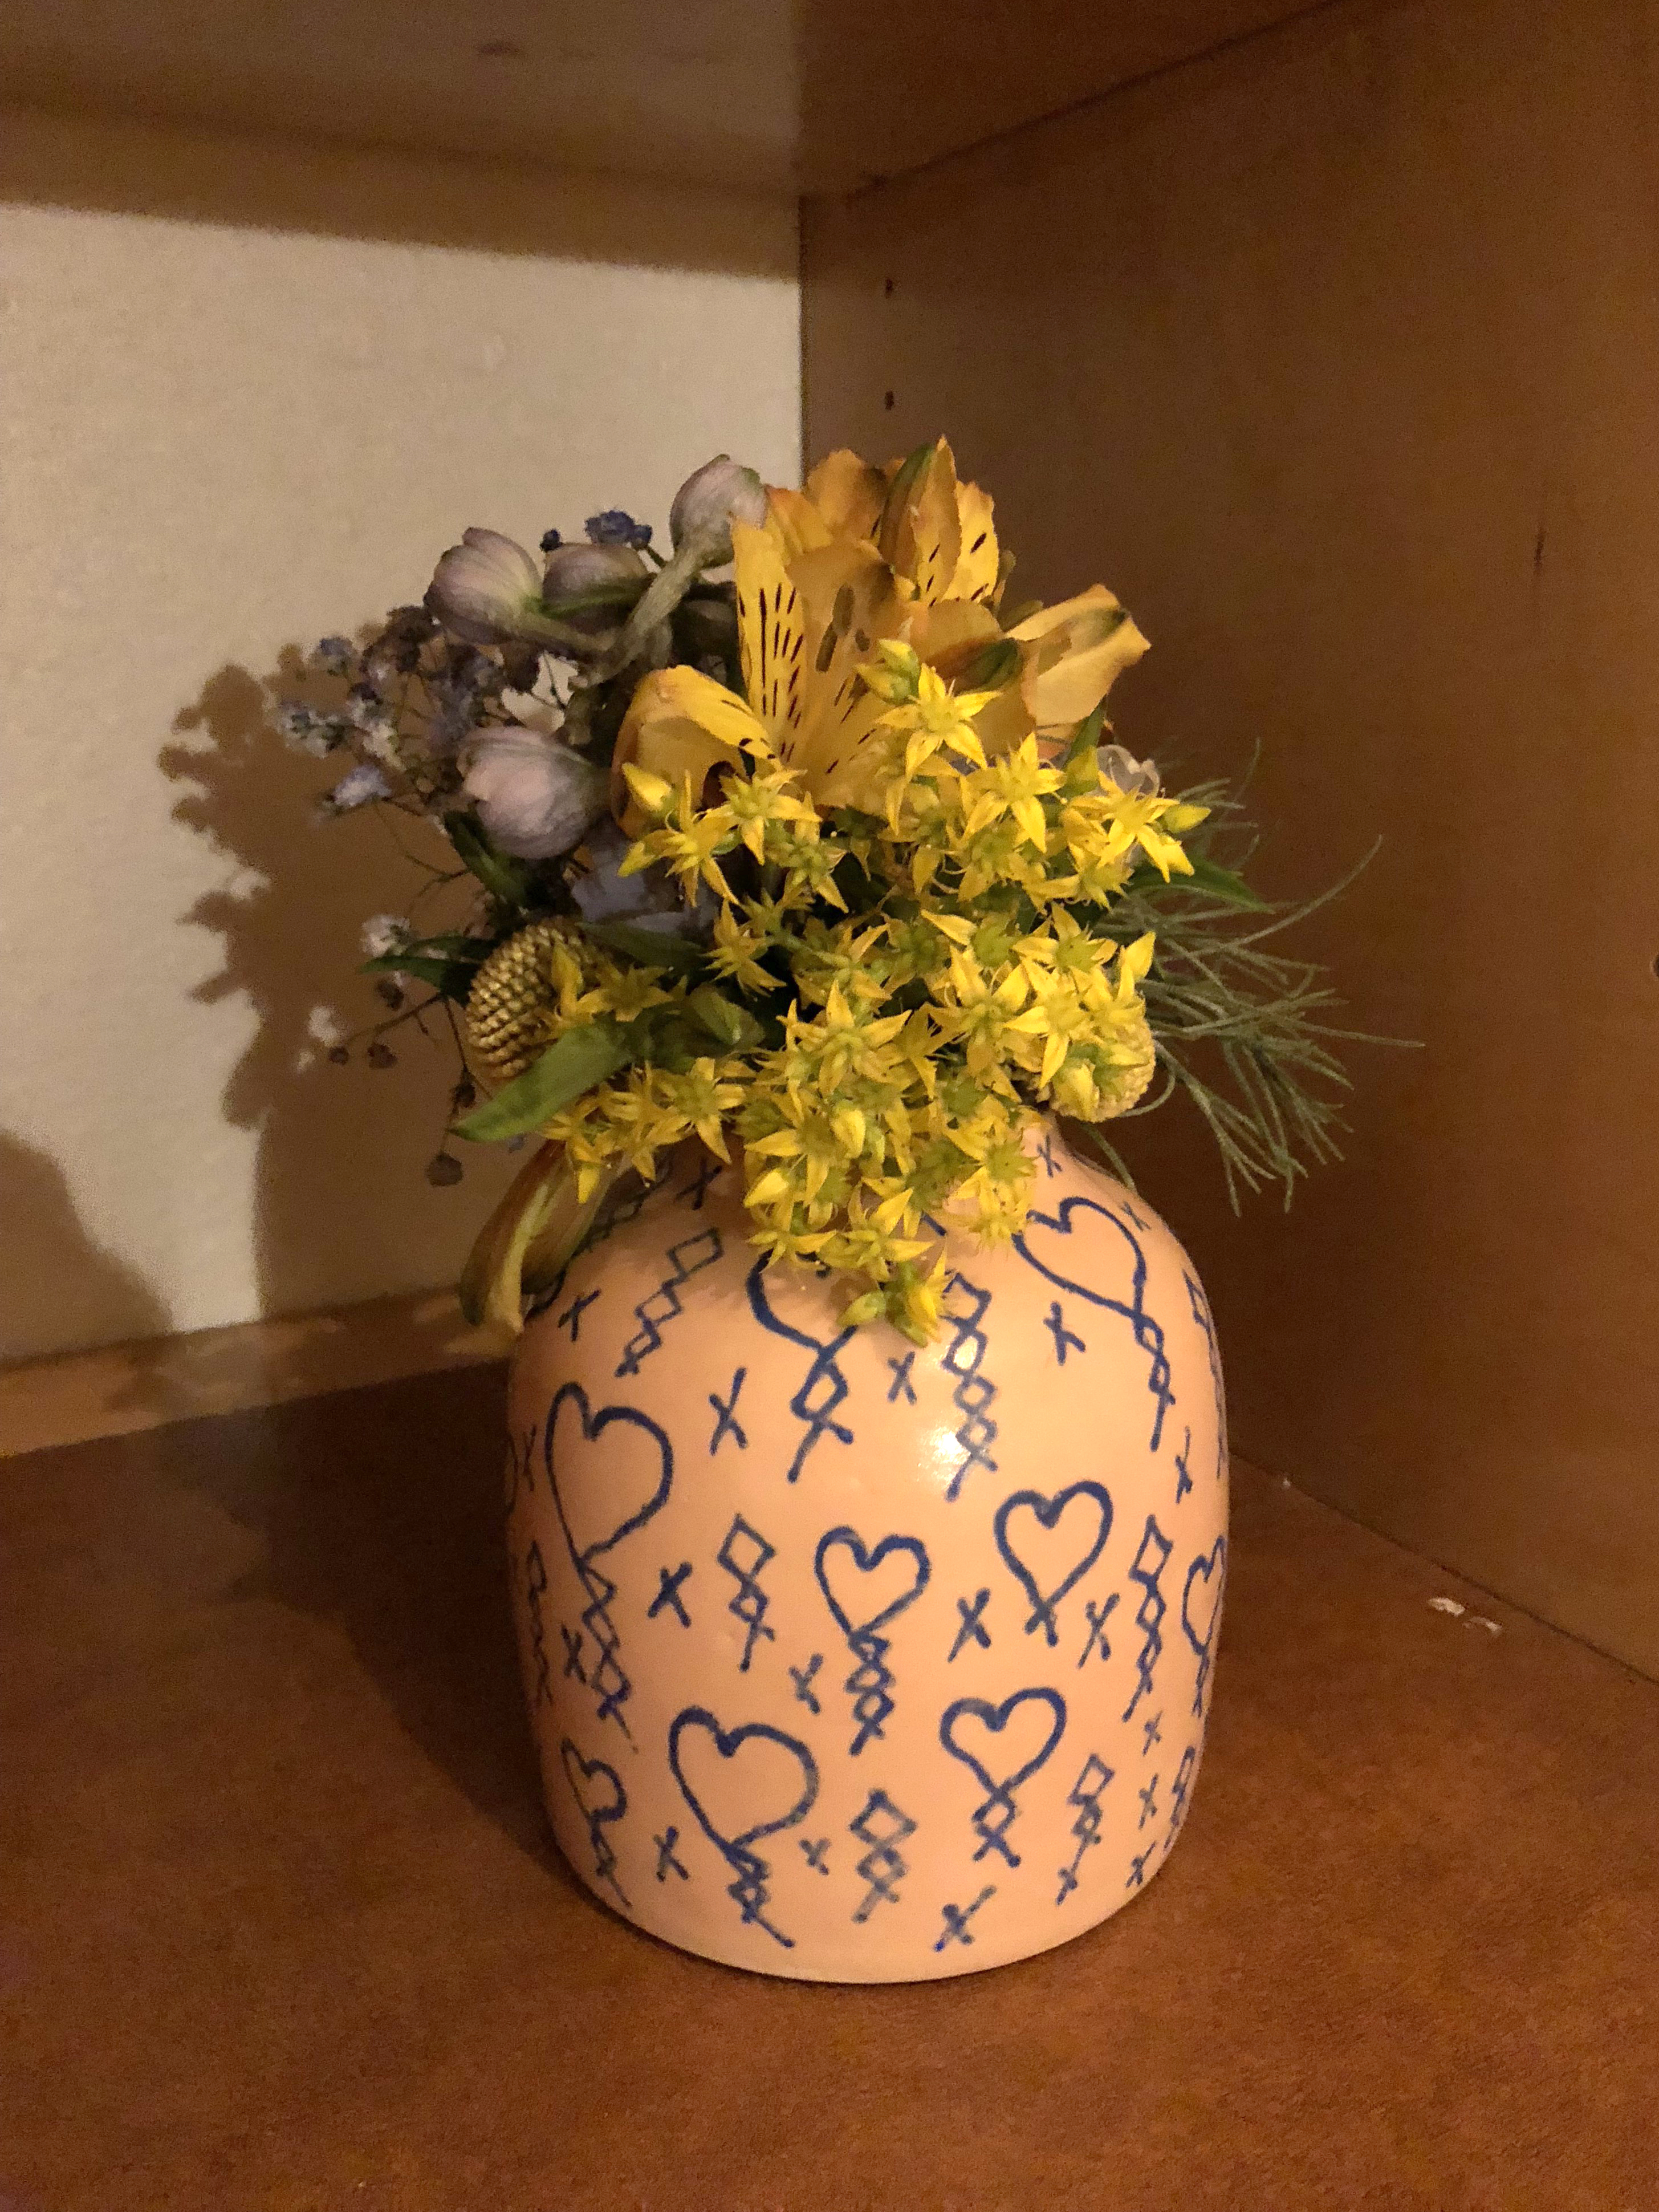 Yellow ceramic vase with drawings on it holding colorful flowers